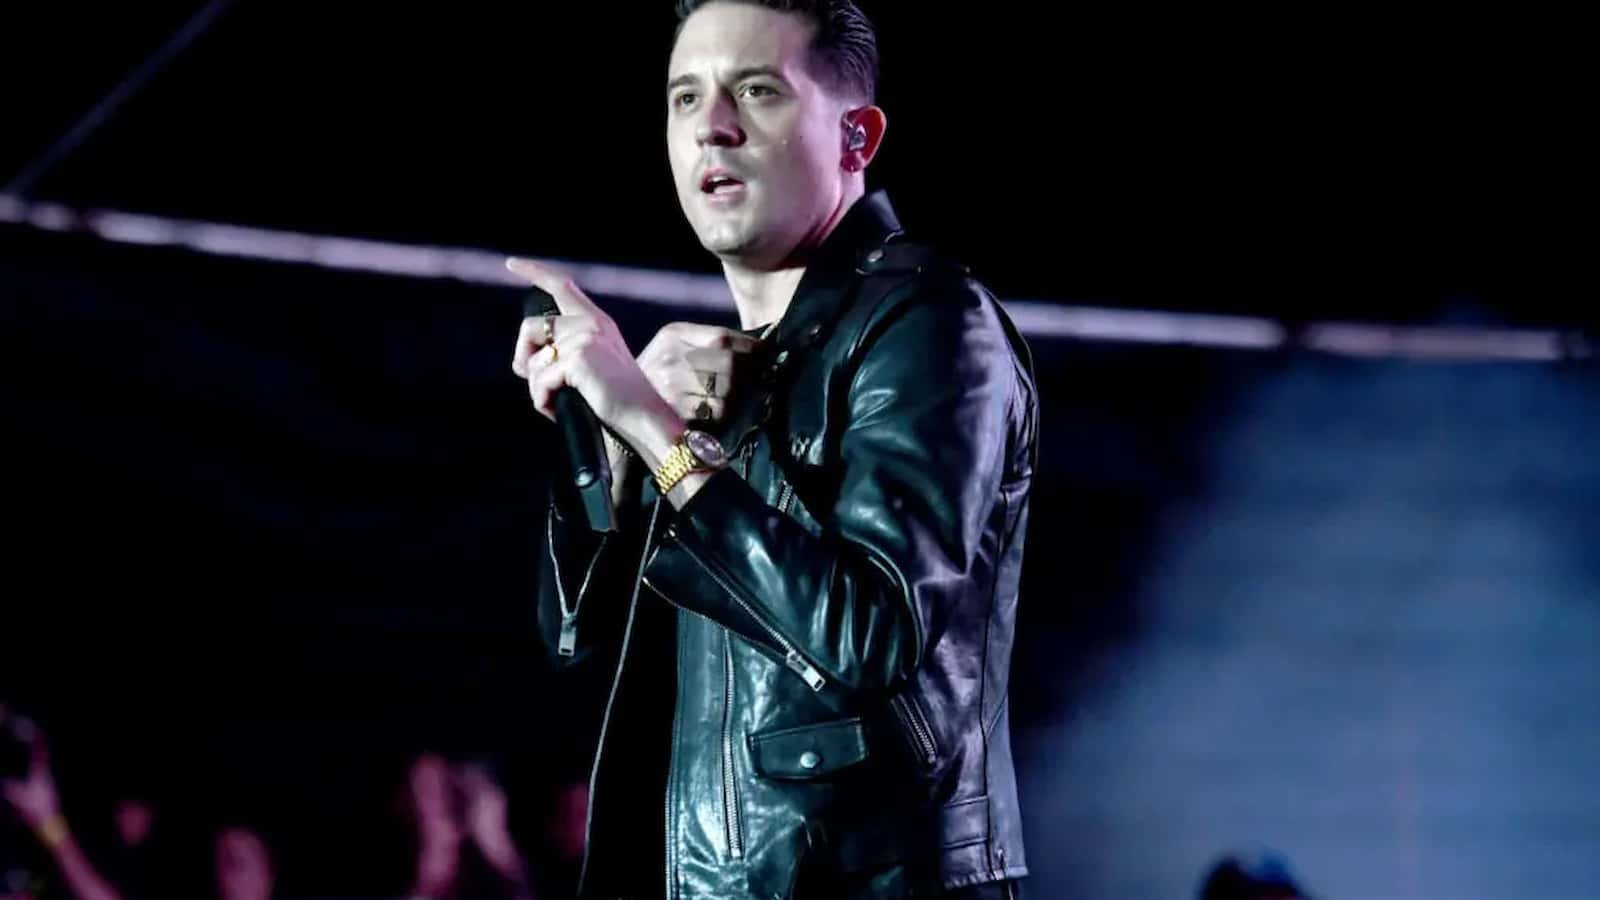 G-Eazy Biography: Early Life, Net Worth, Career, Age, and Birthday